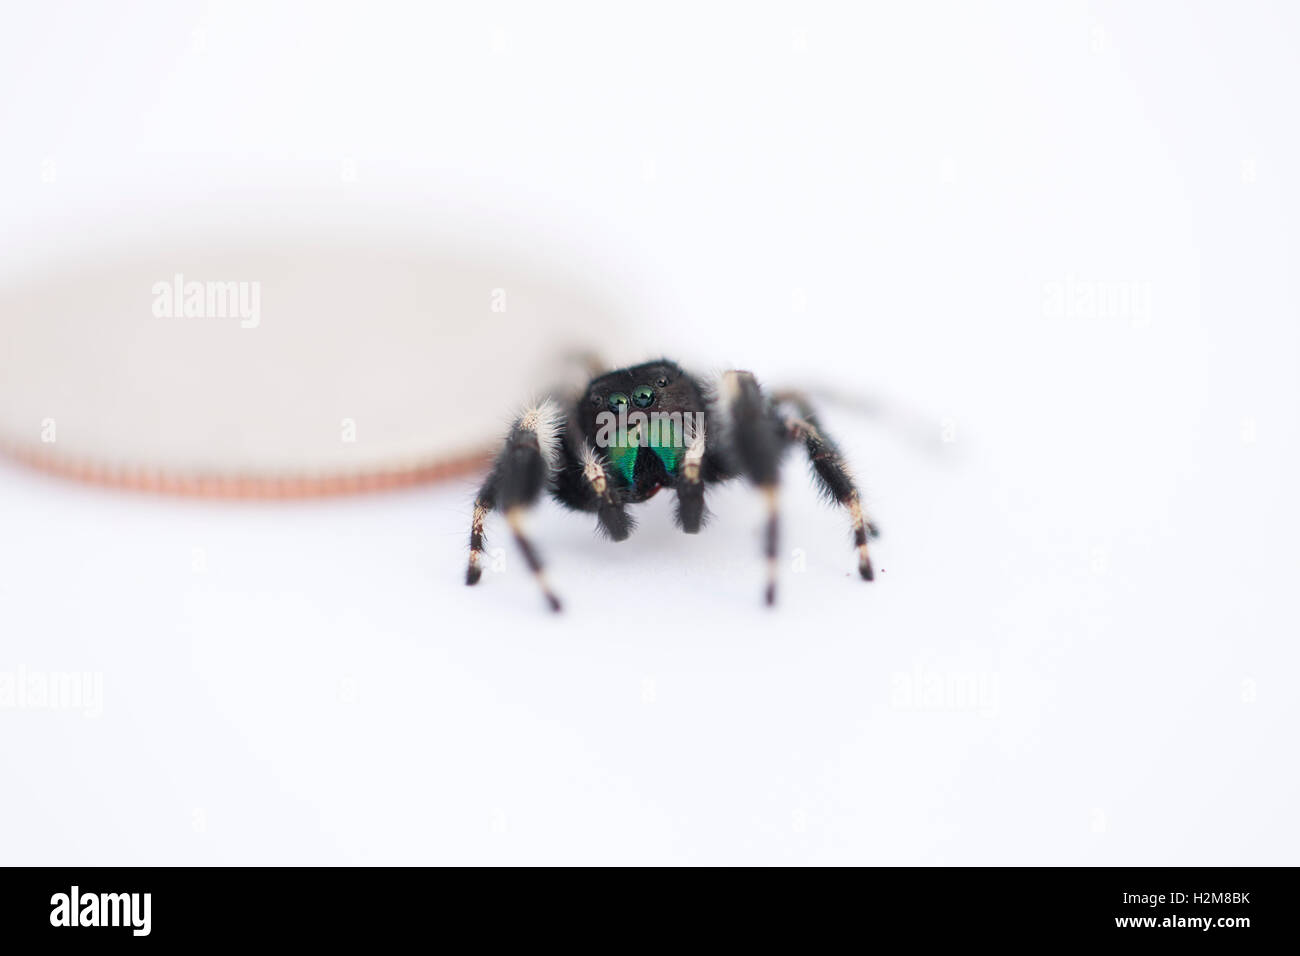 Macro Shot Of A Jumping Spider Stock Photo